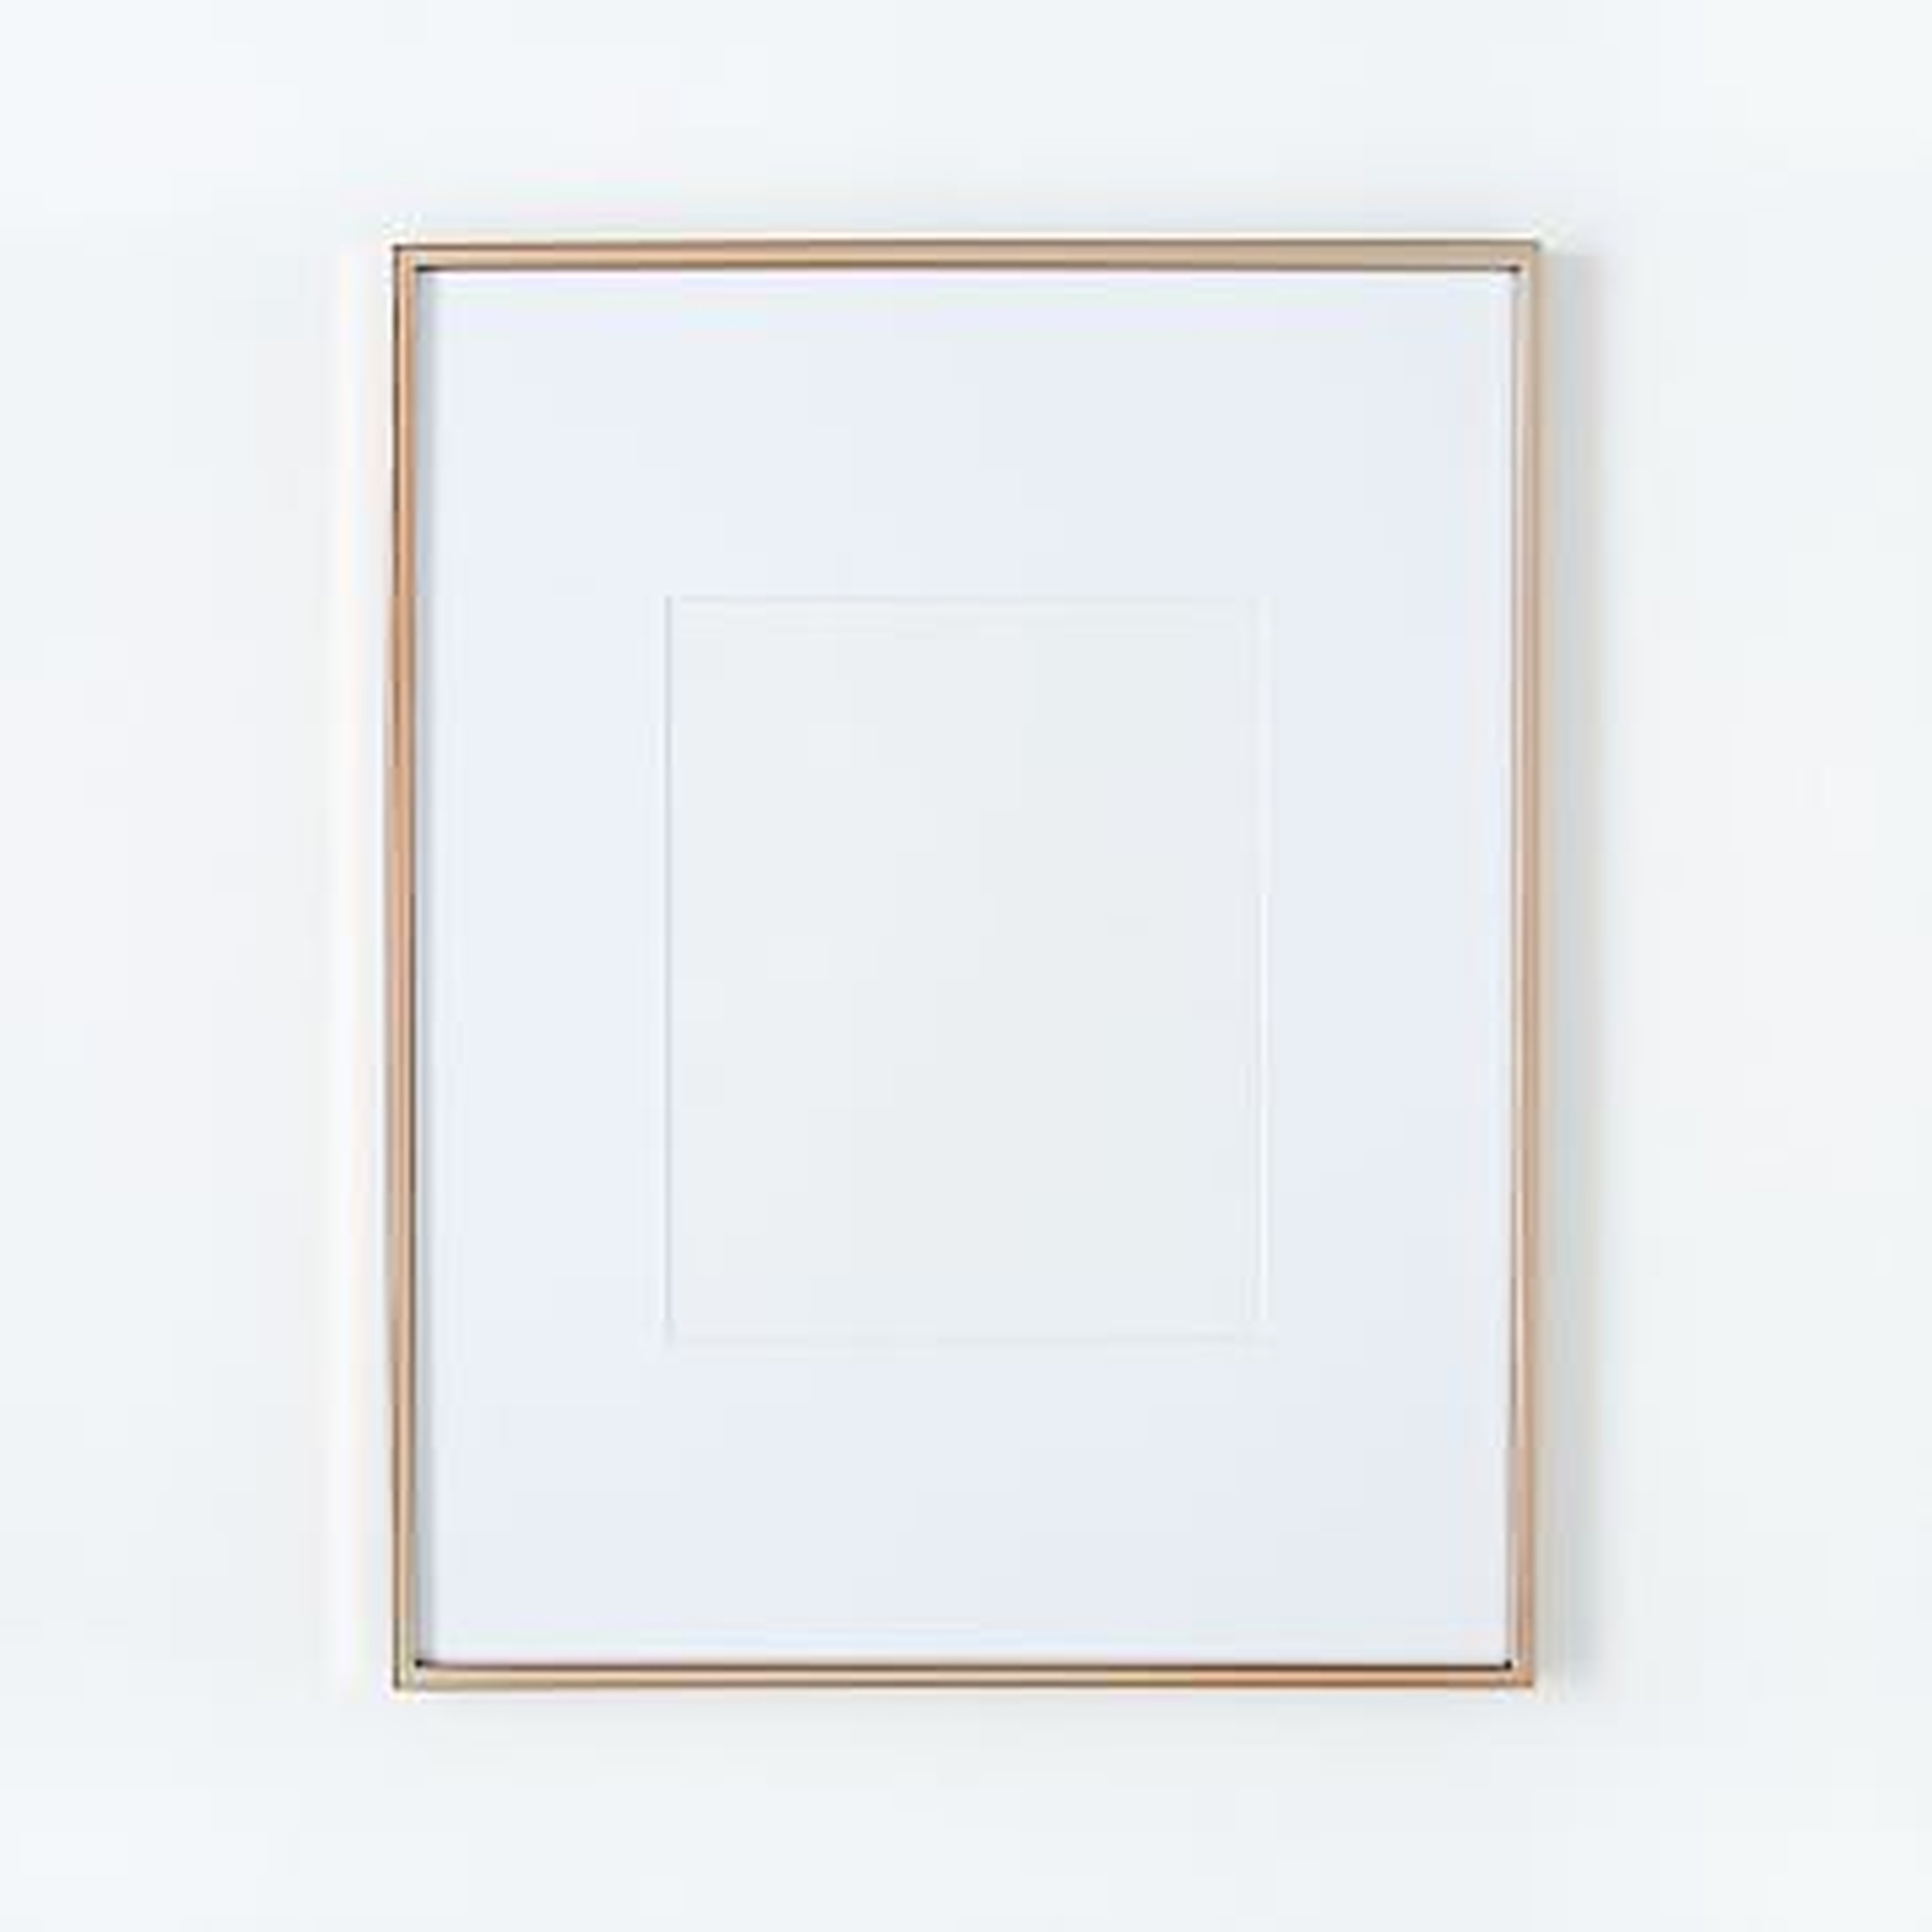 Gallery Frame, Rose Gold, 8" x 10" (15" x 19" without mat) - West Elm